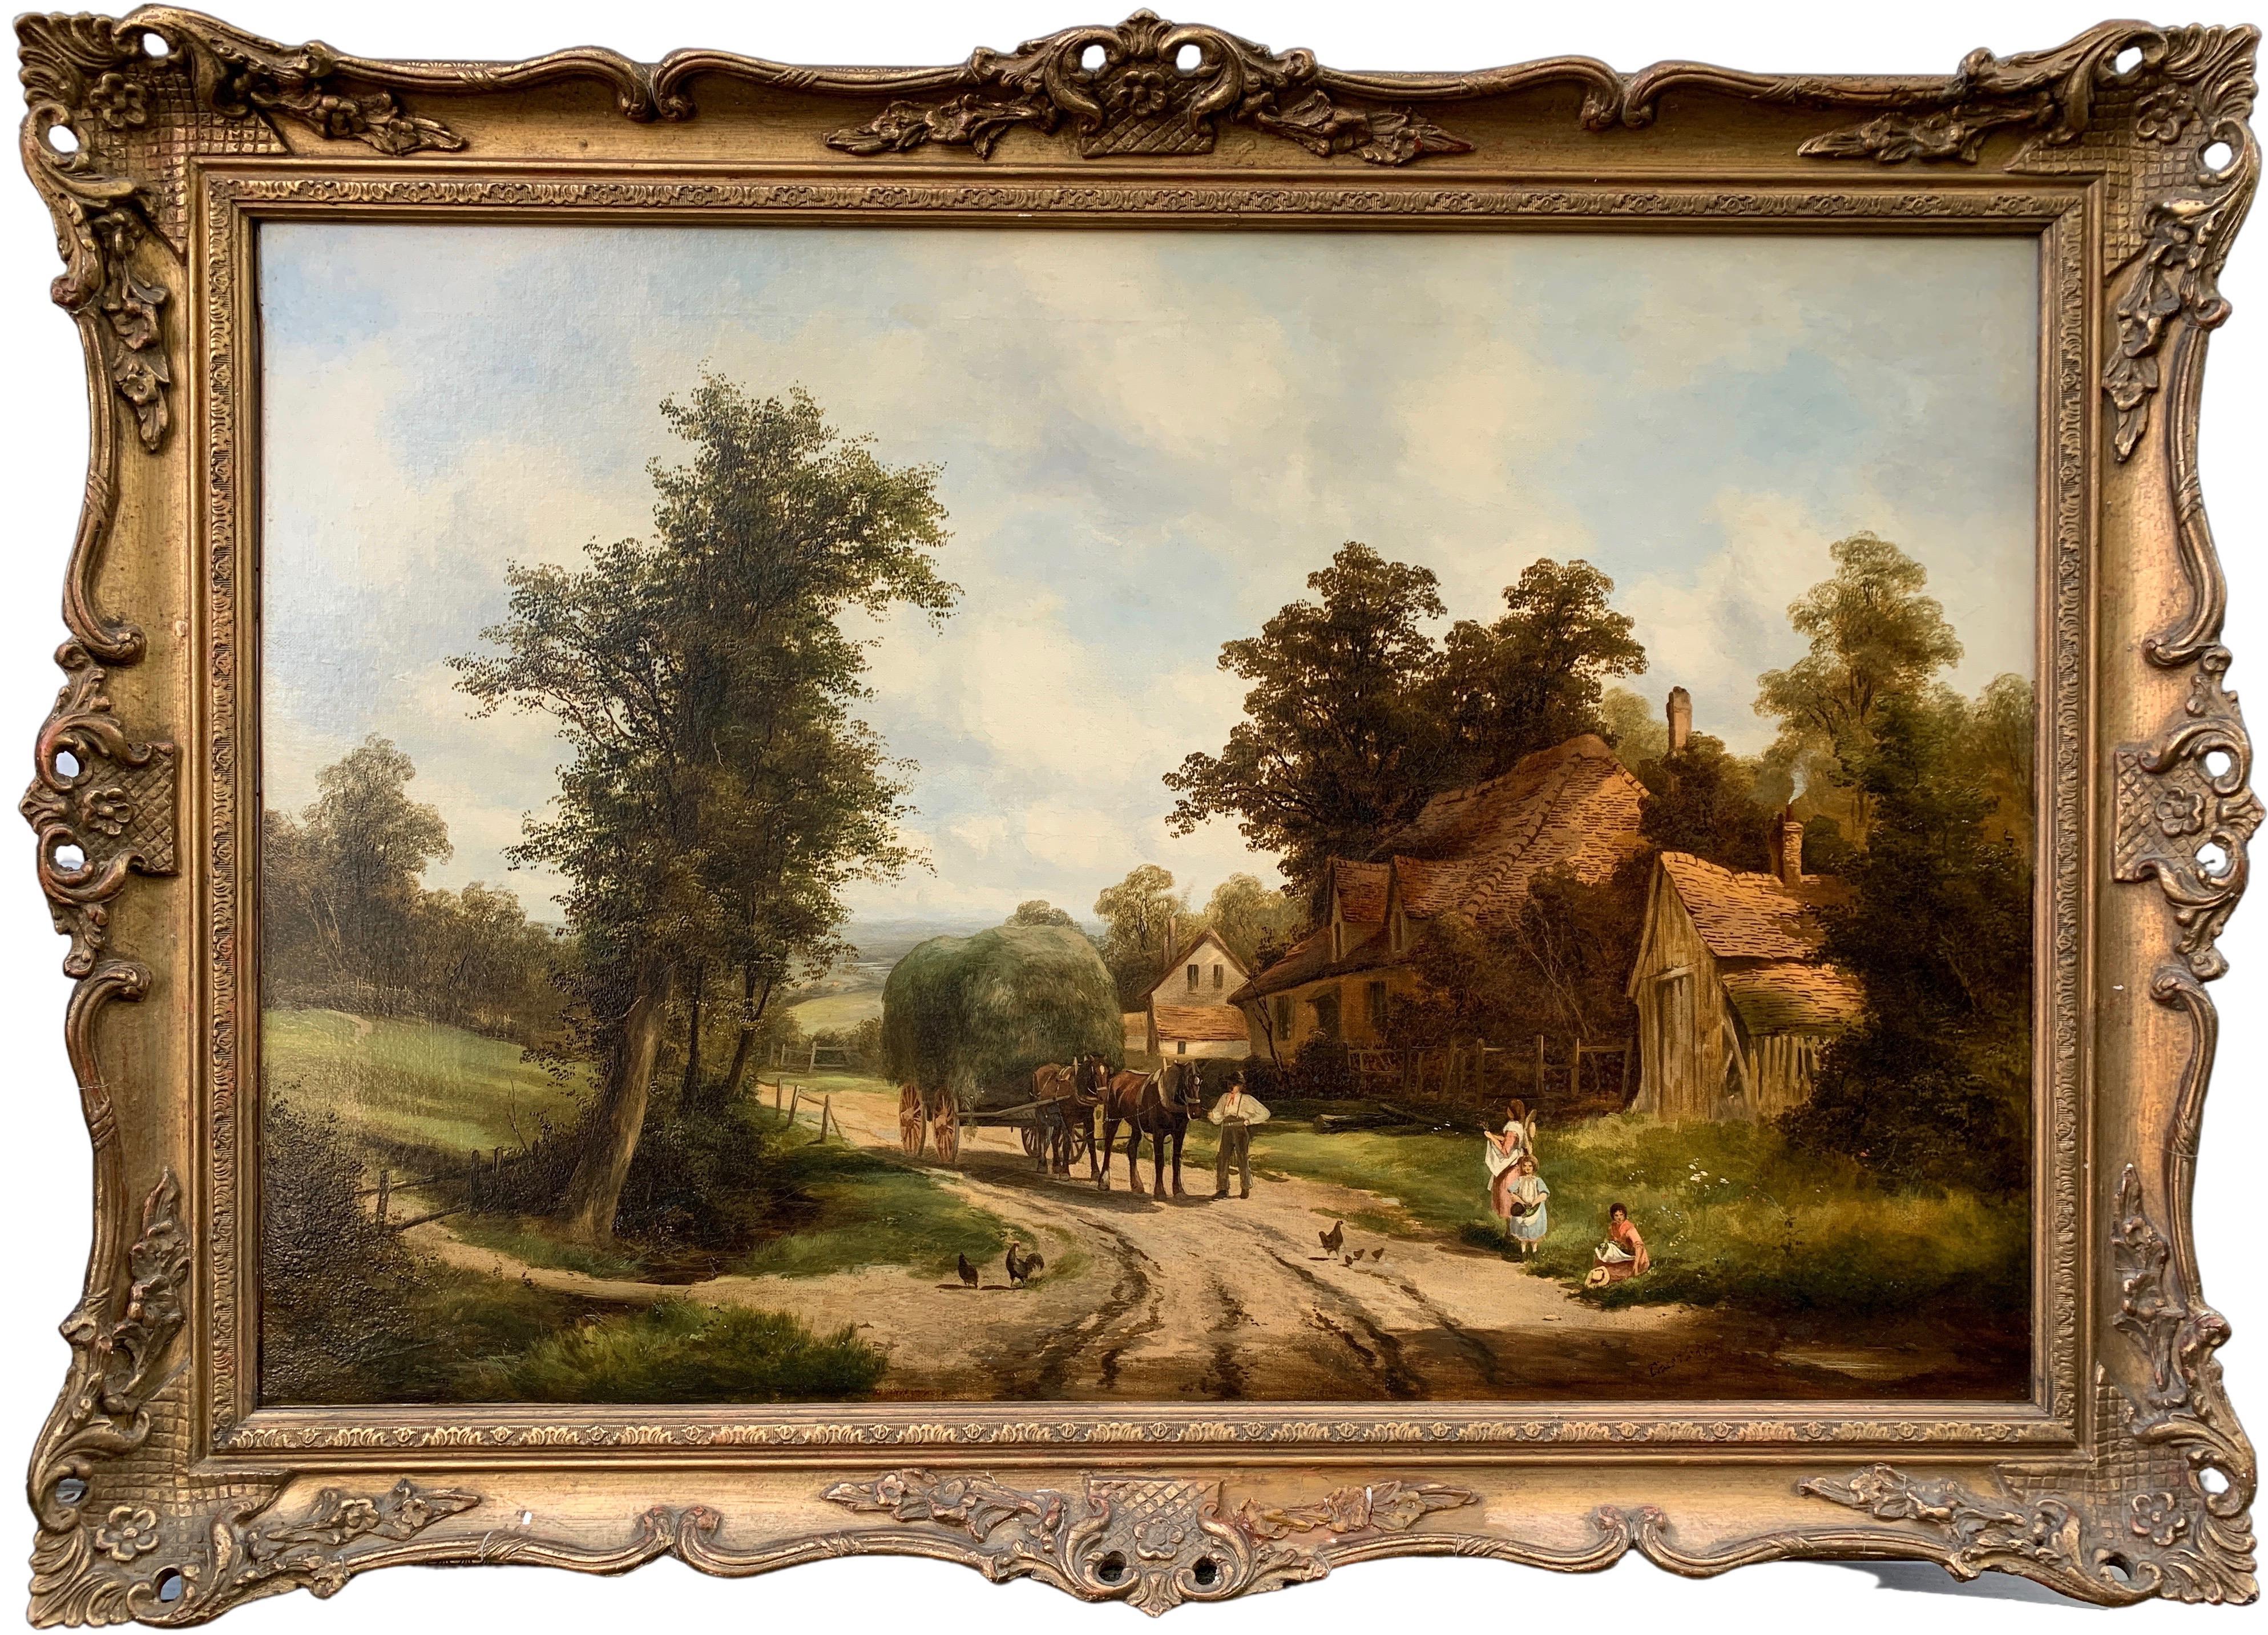 Charles Vickers Figurative Painting - Late 19th century Antique English Village landscape, horses, people, haycart.